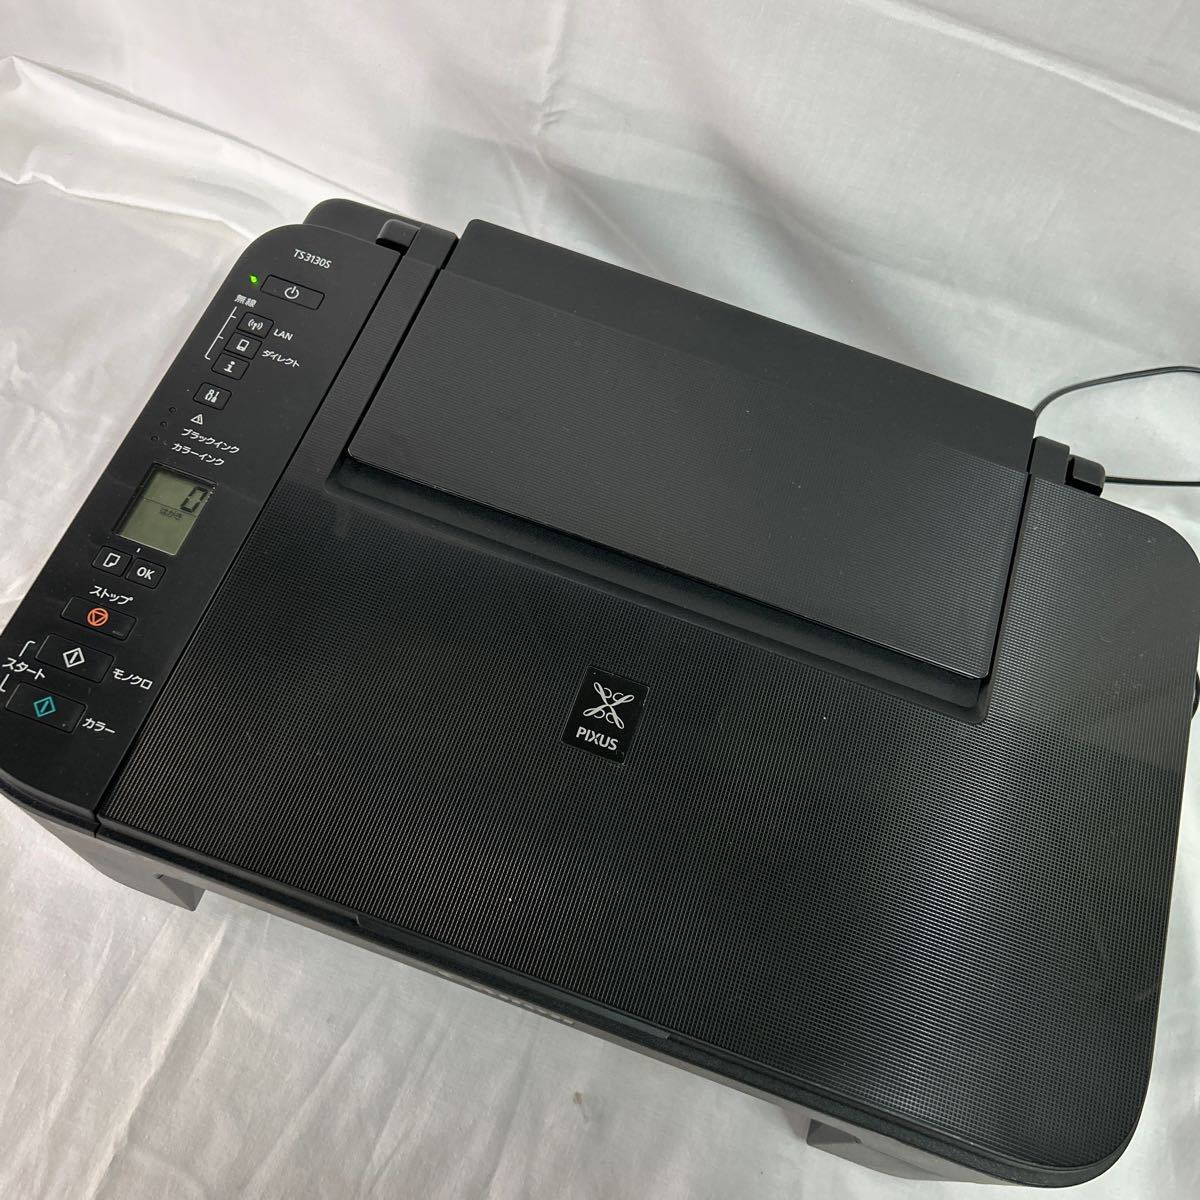 Canon Canon PIXUS TS3130 ink-jet printer multifunction machine BLACK black printer electrification only has confirmed [otna-899]